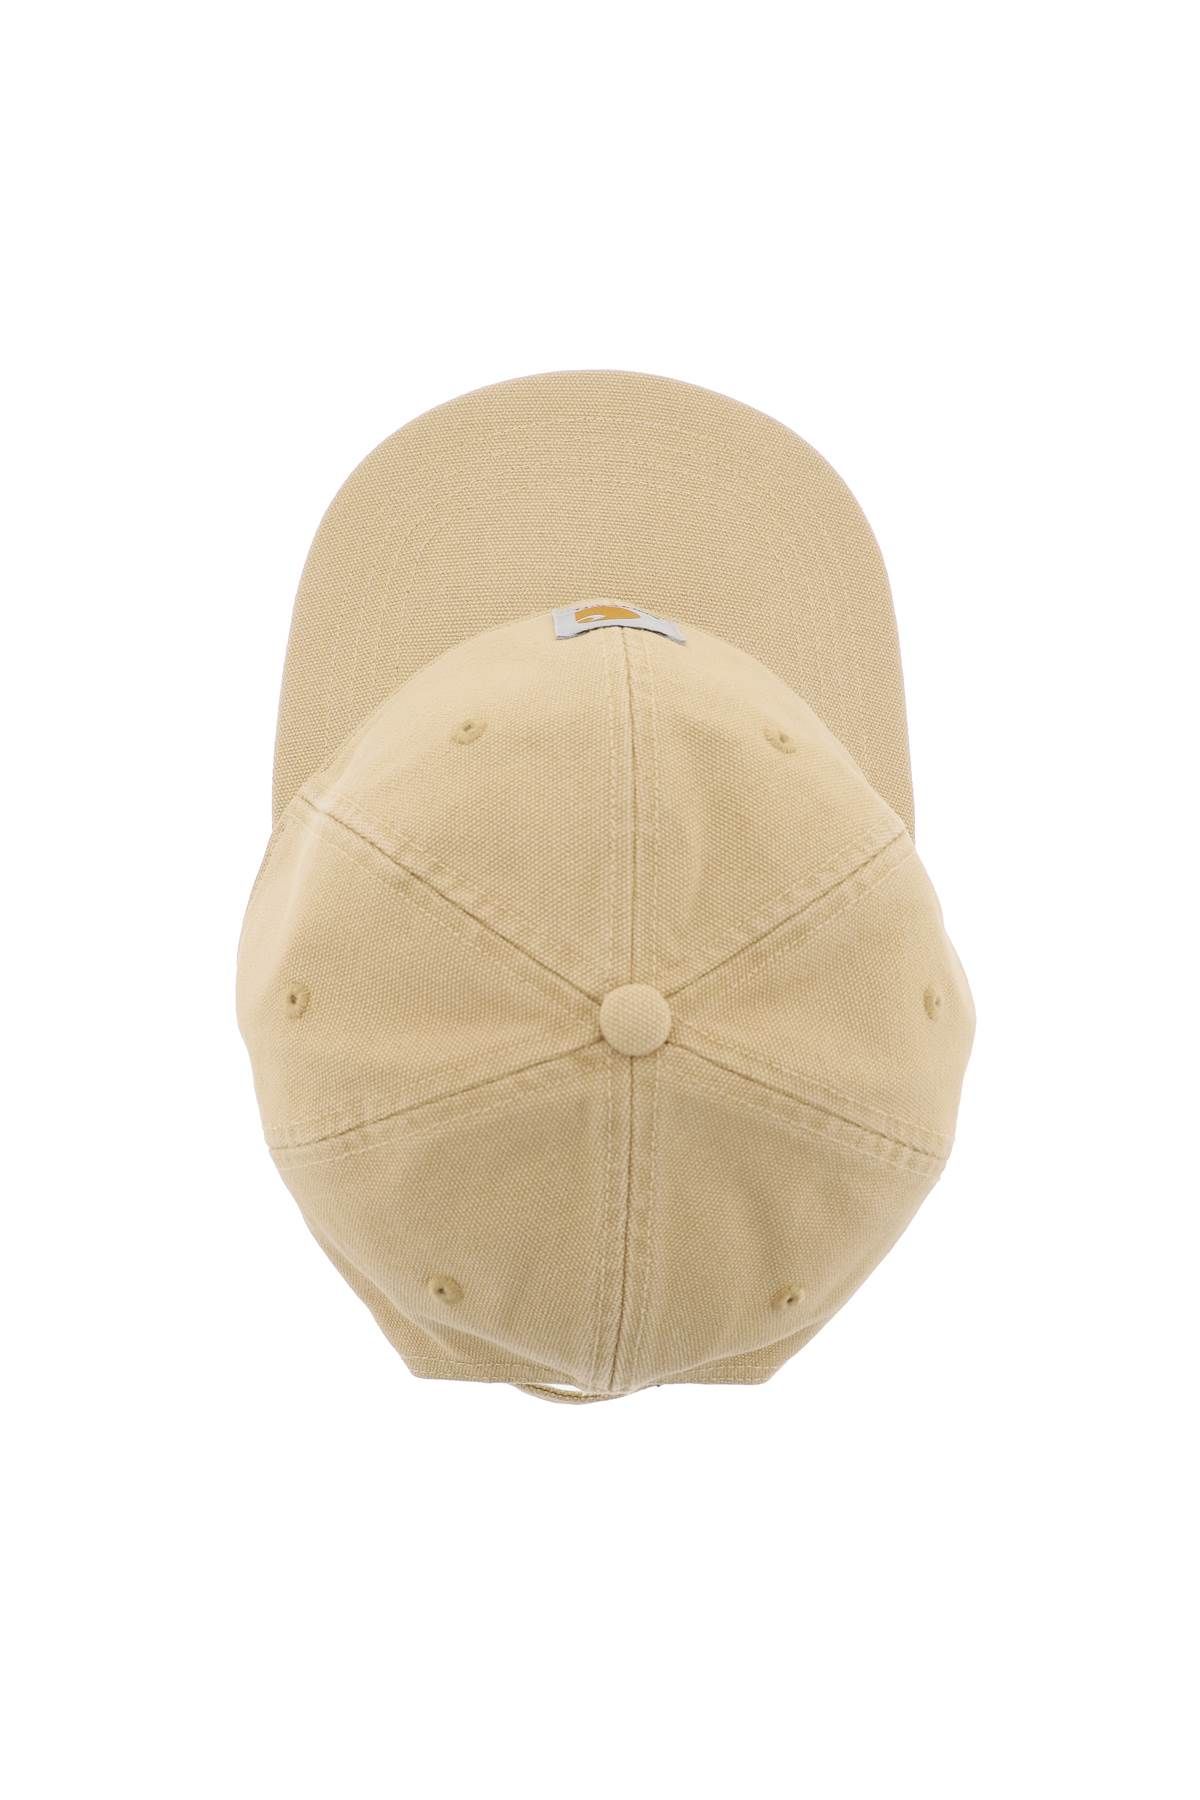 Shop Carhartt Icon Baseball Cap With Patch Logo In Beige